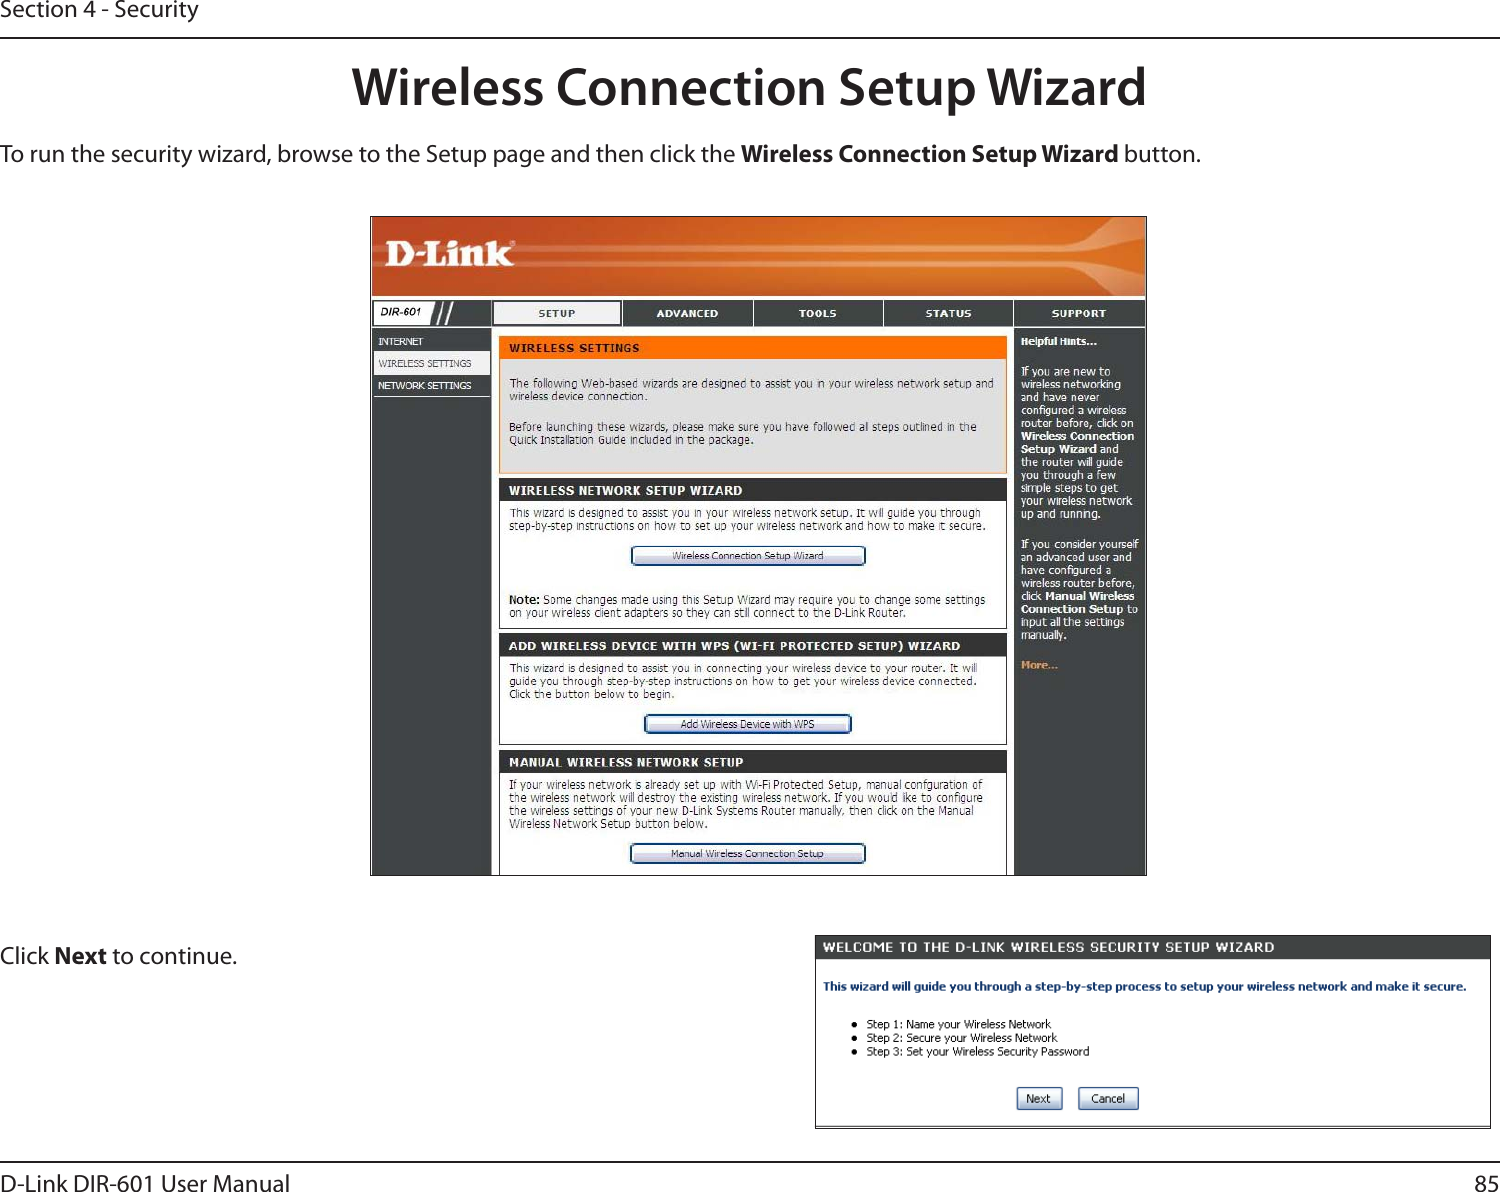 85D-Link DIR-601 User ManualSection 4 - SecurityWireless Connection Setup WizardTo run the security wizard, browse to the Setup page and then click the WirelessConnectionSetupWizardbutton. Click Next to continue.